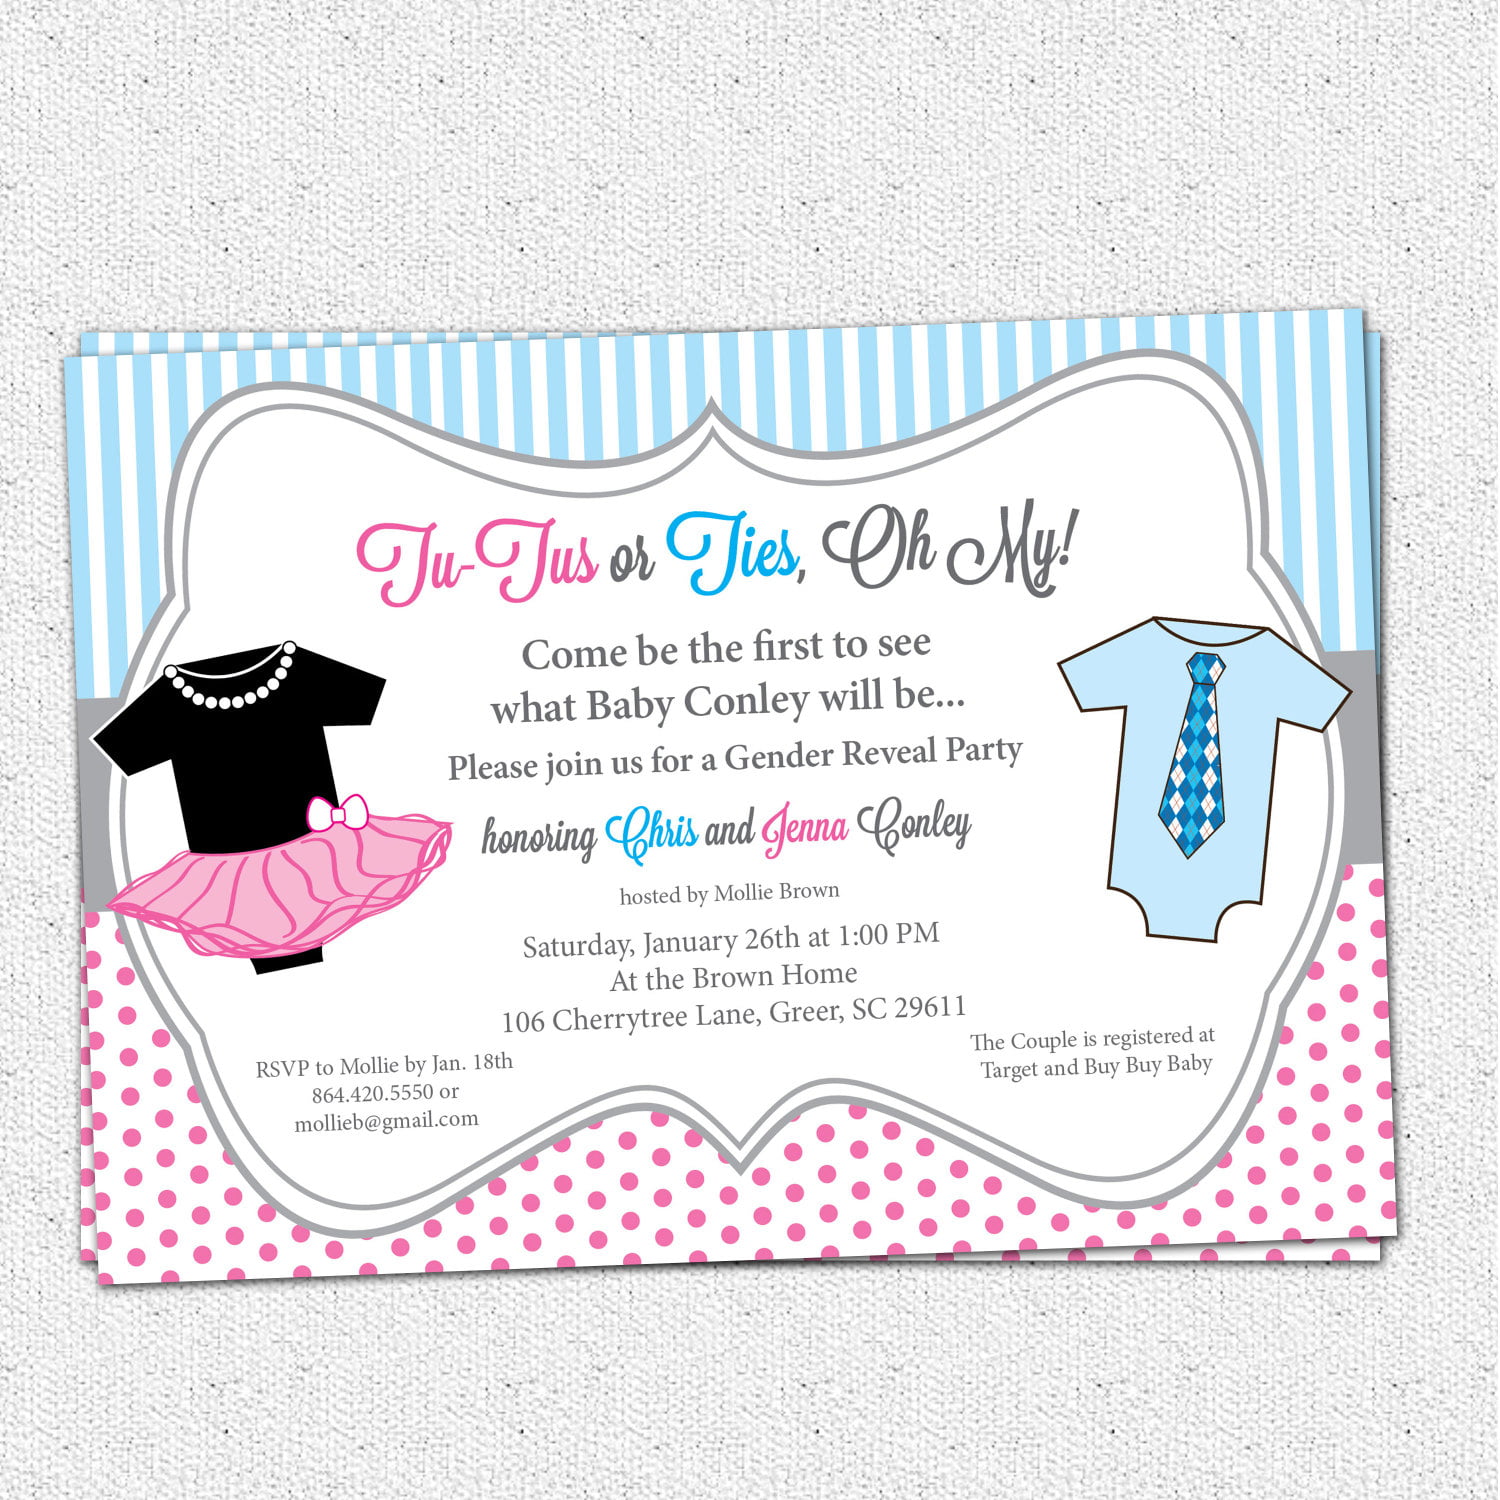 dress how to make your own baby shower invitations